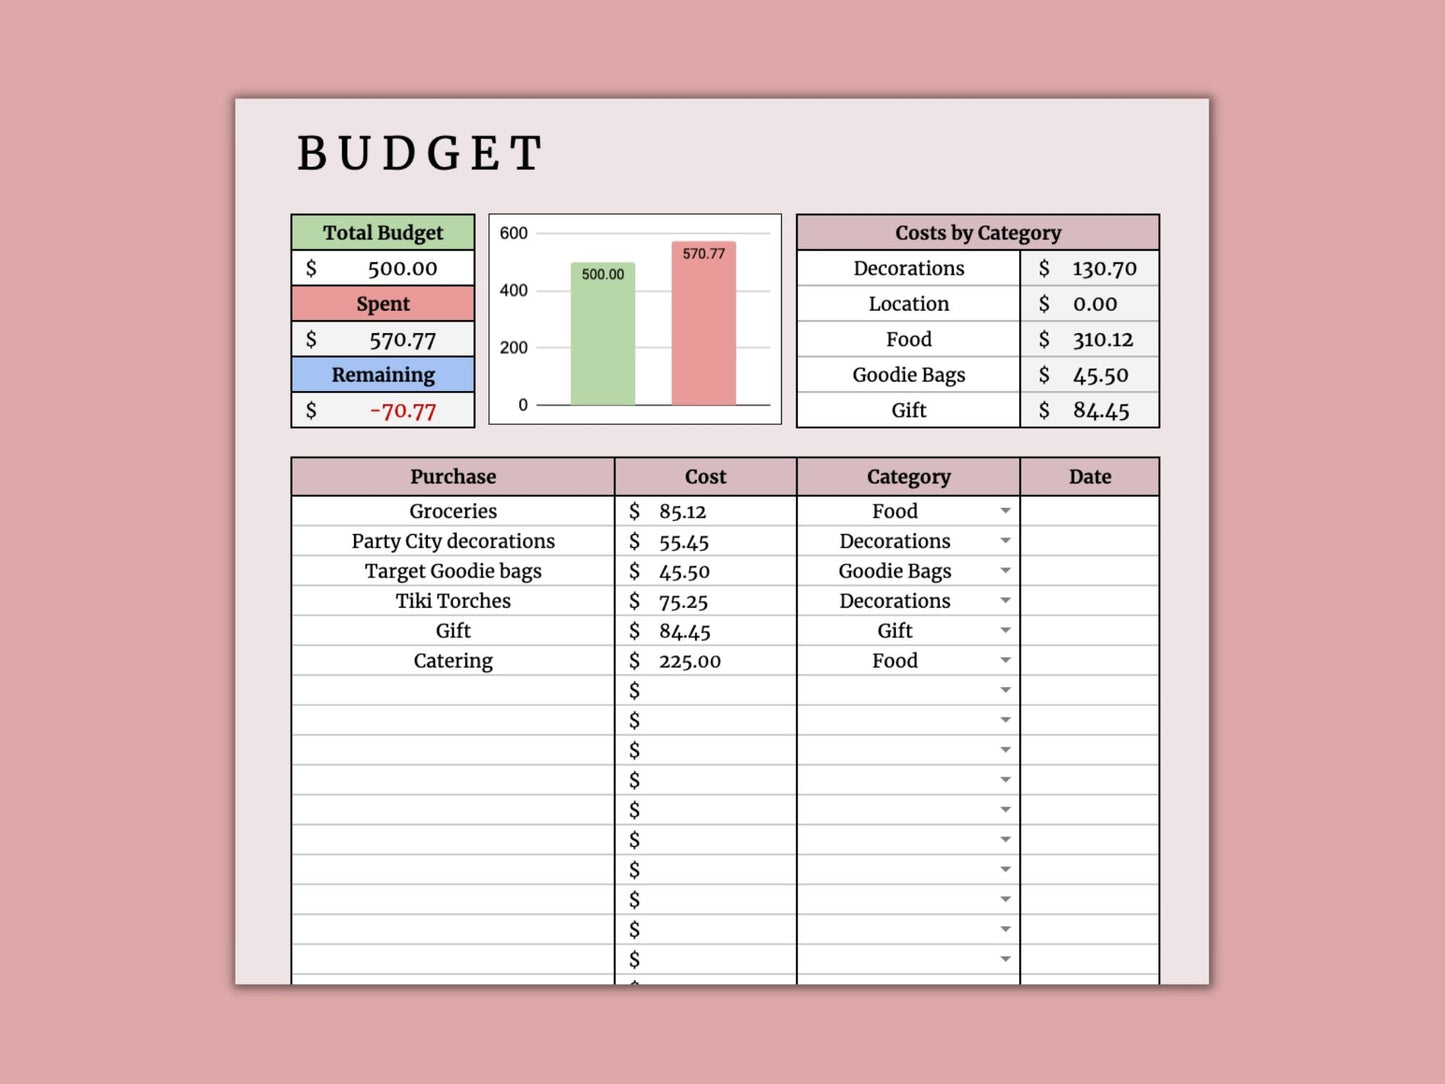 Party Planner | Google Sheets Template